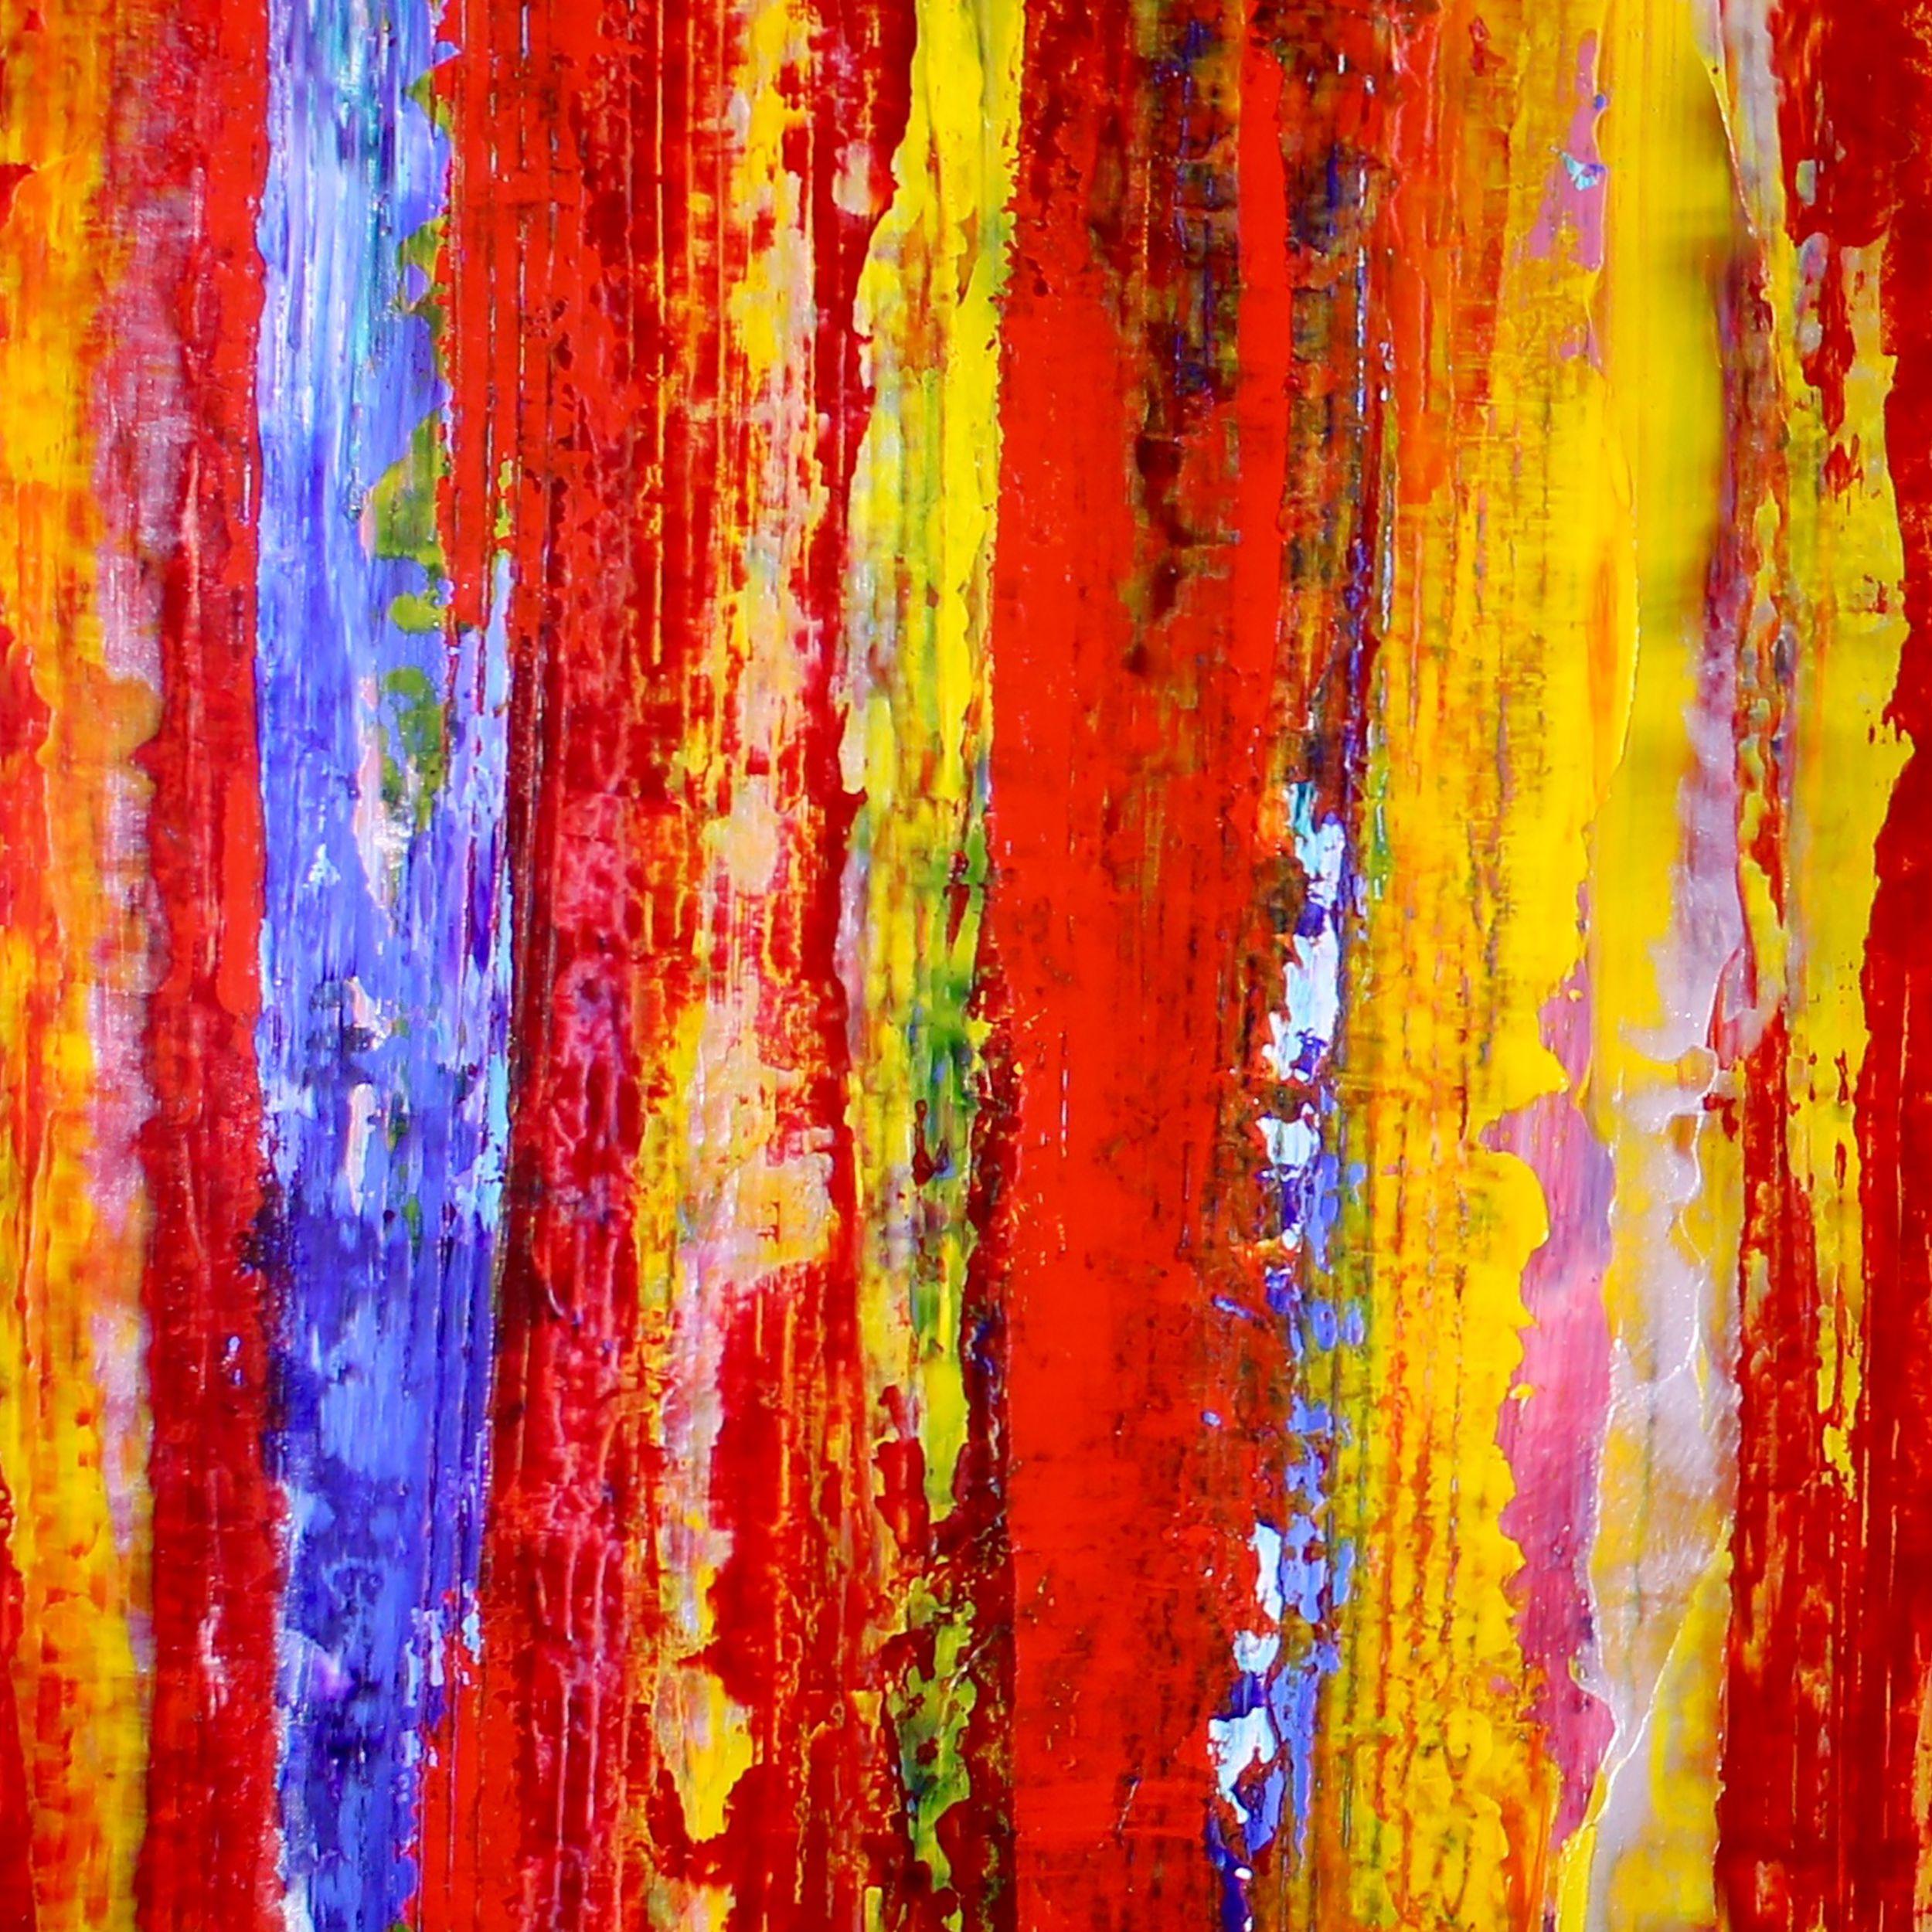 One Blue Line, Painting, Acrylic on Canvas - Red Abstract Painting by Nestor Toro